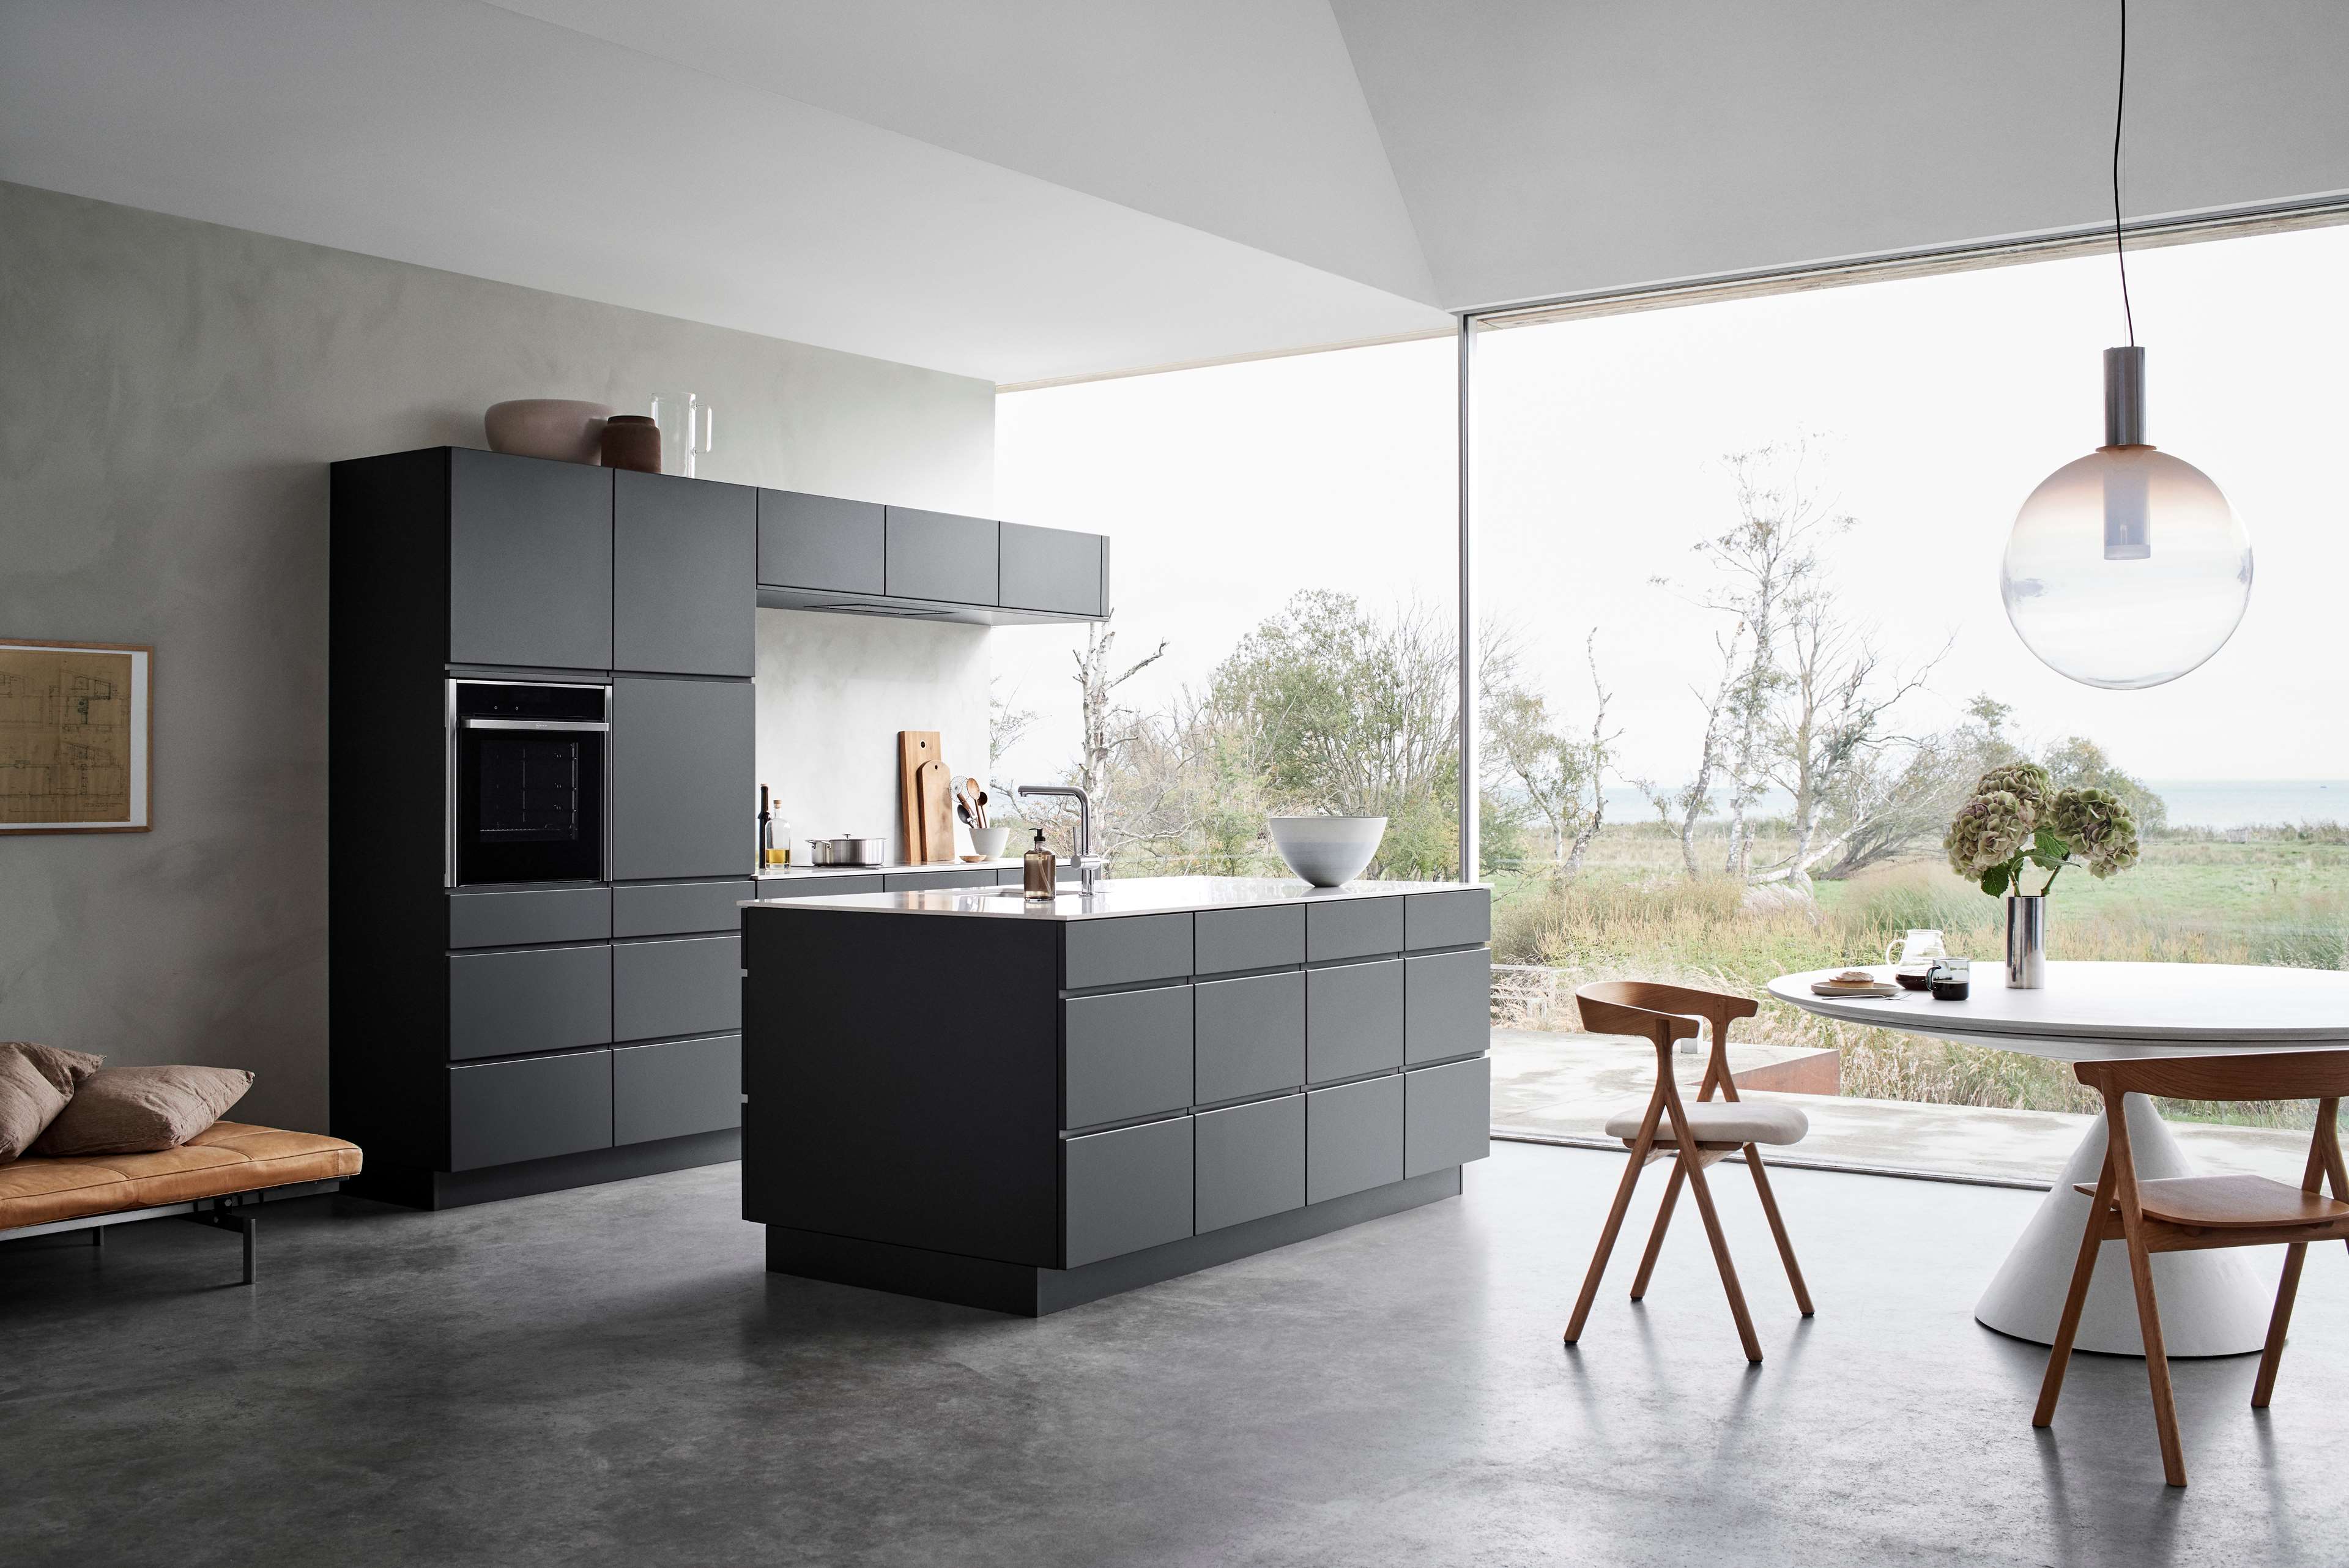 Black kitchen with kitchen island and colored black fronts